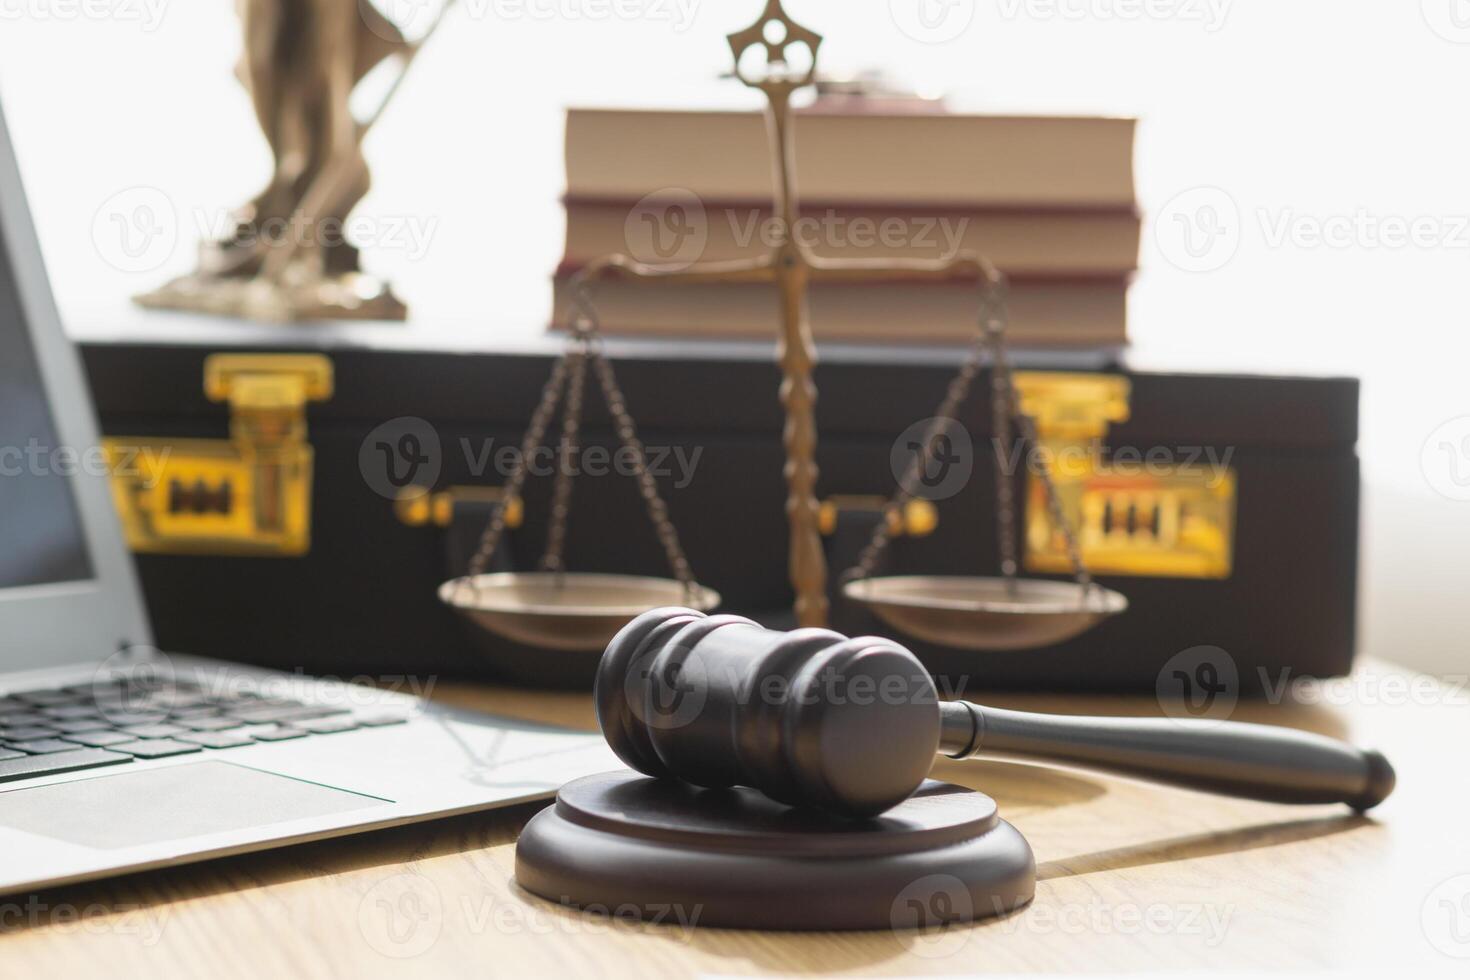 A judge gavel is prepared in the courtroom to be used to give a signal when the verdict is read after the trial is completed. Concept judge gavel is prepared to symbolize the decision in a court case. photo